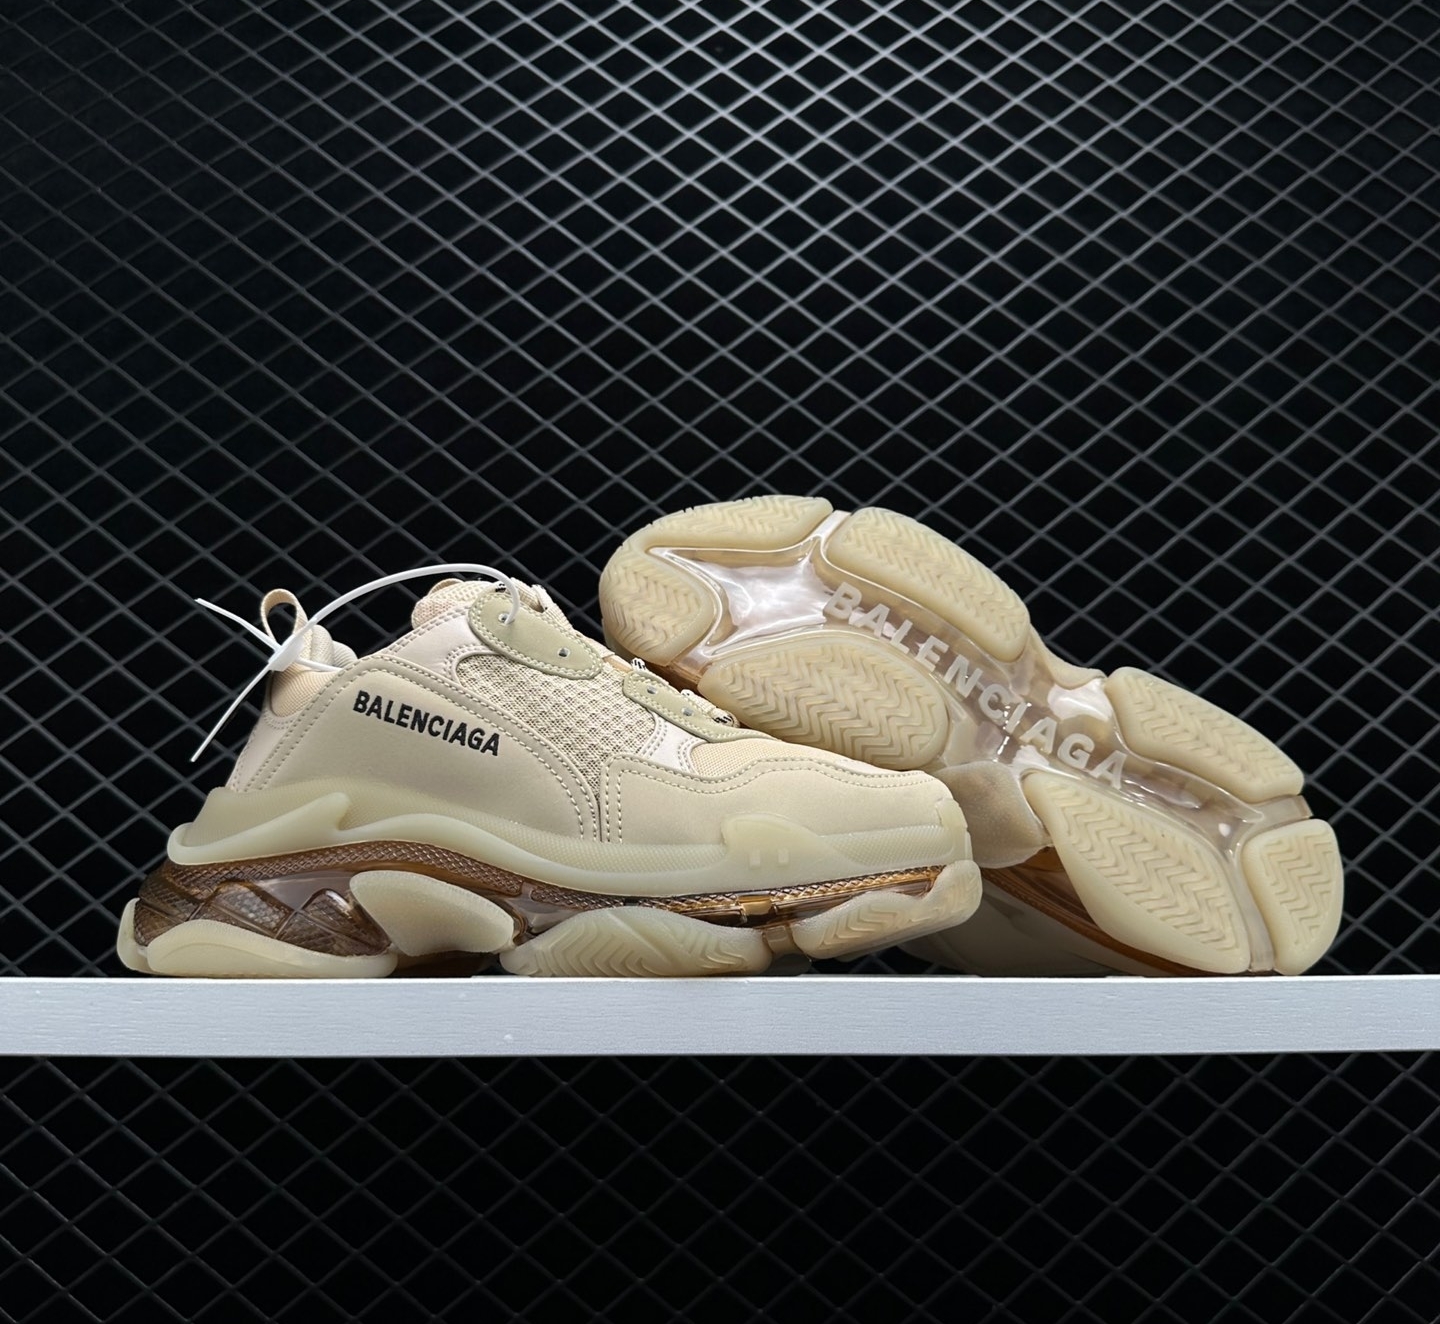 Balenciaga Triple S Leather Trainers Beige - Stylish and Comfortable Footwear